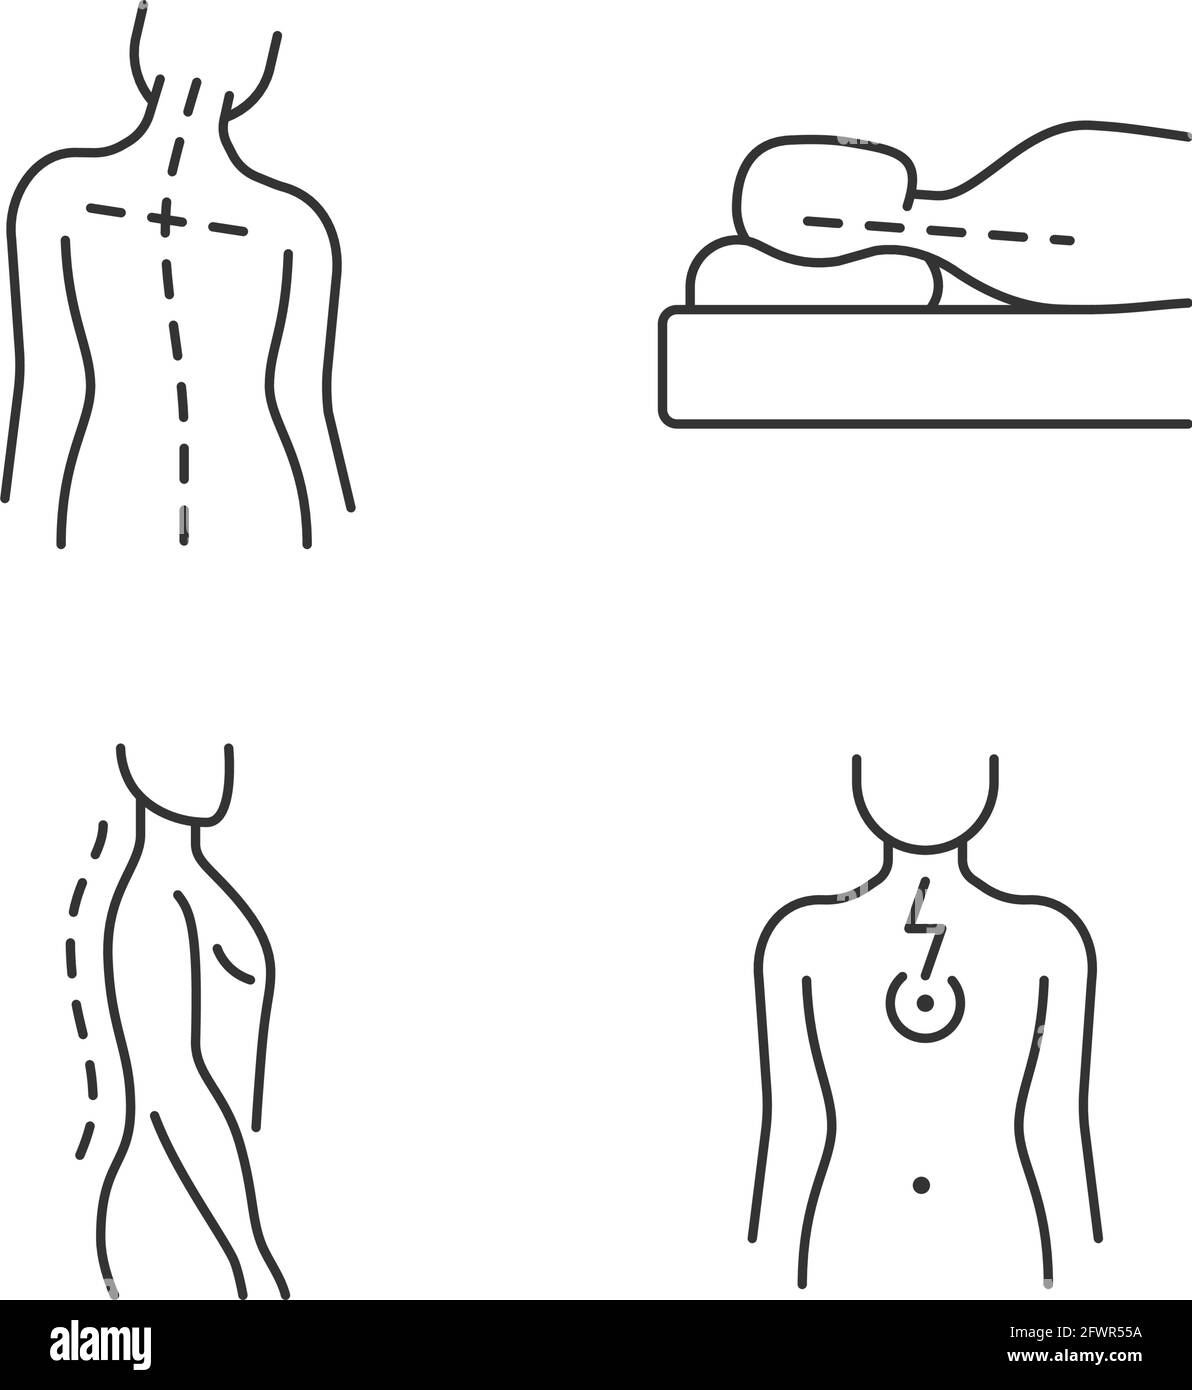 Postural dysfunction linear icons set Stock Vector